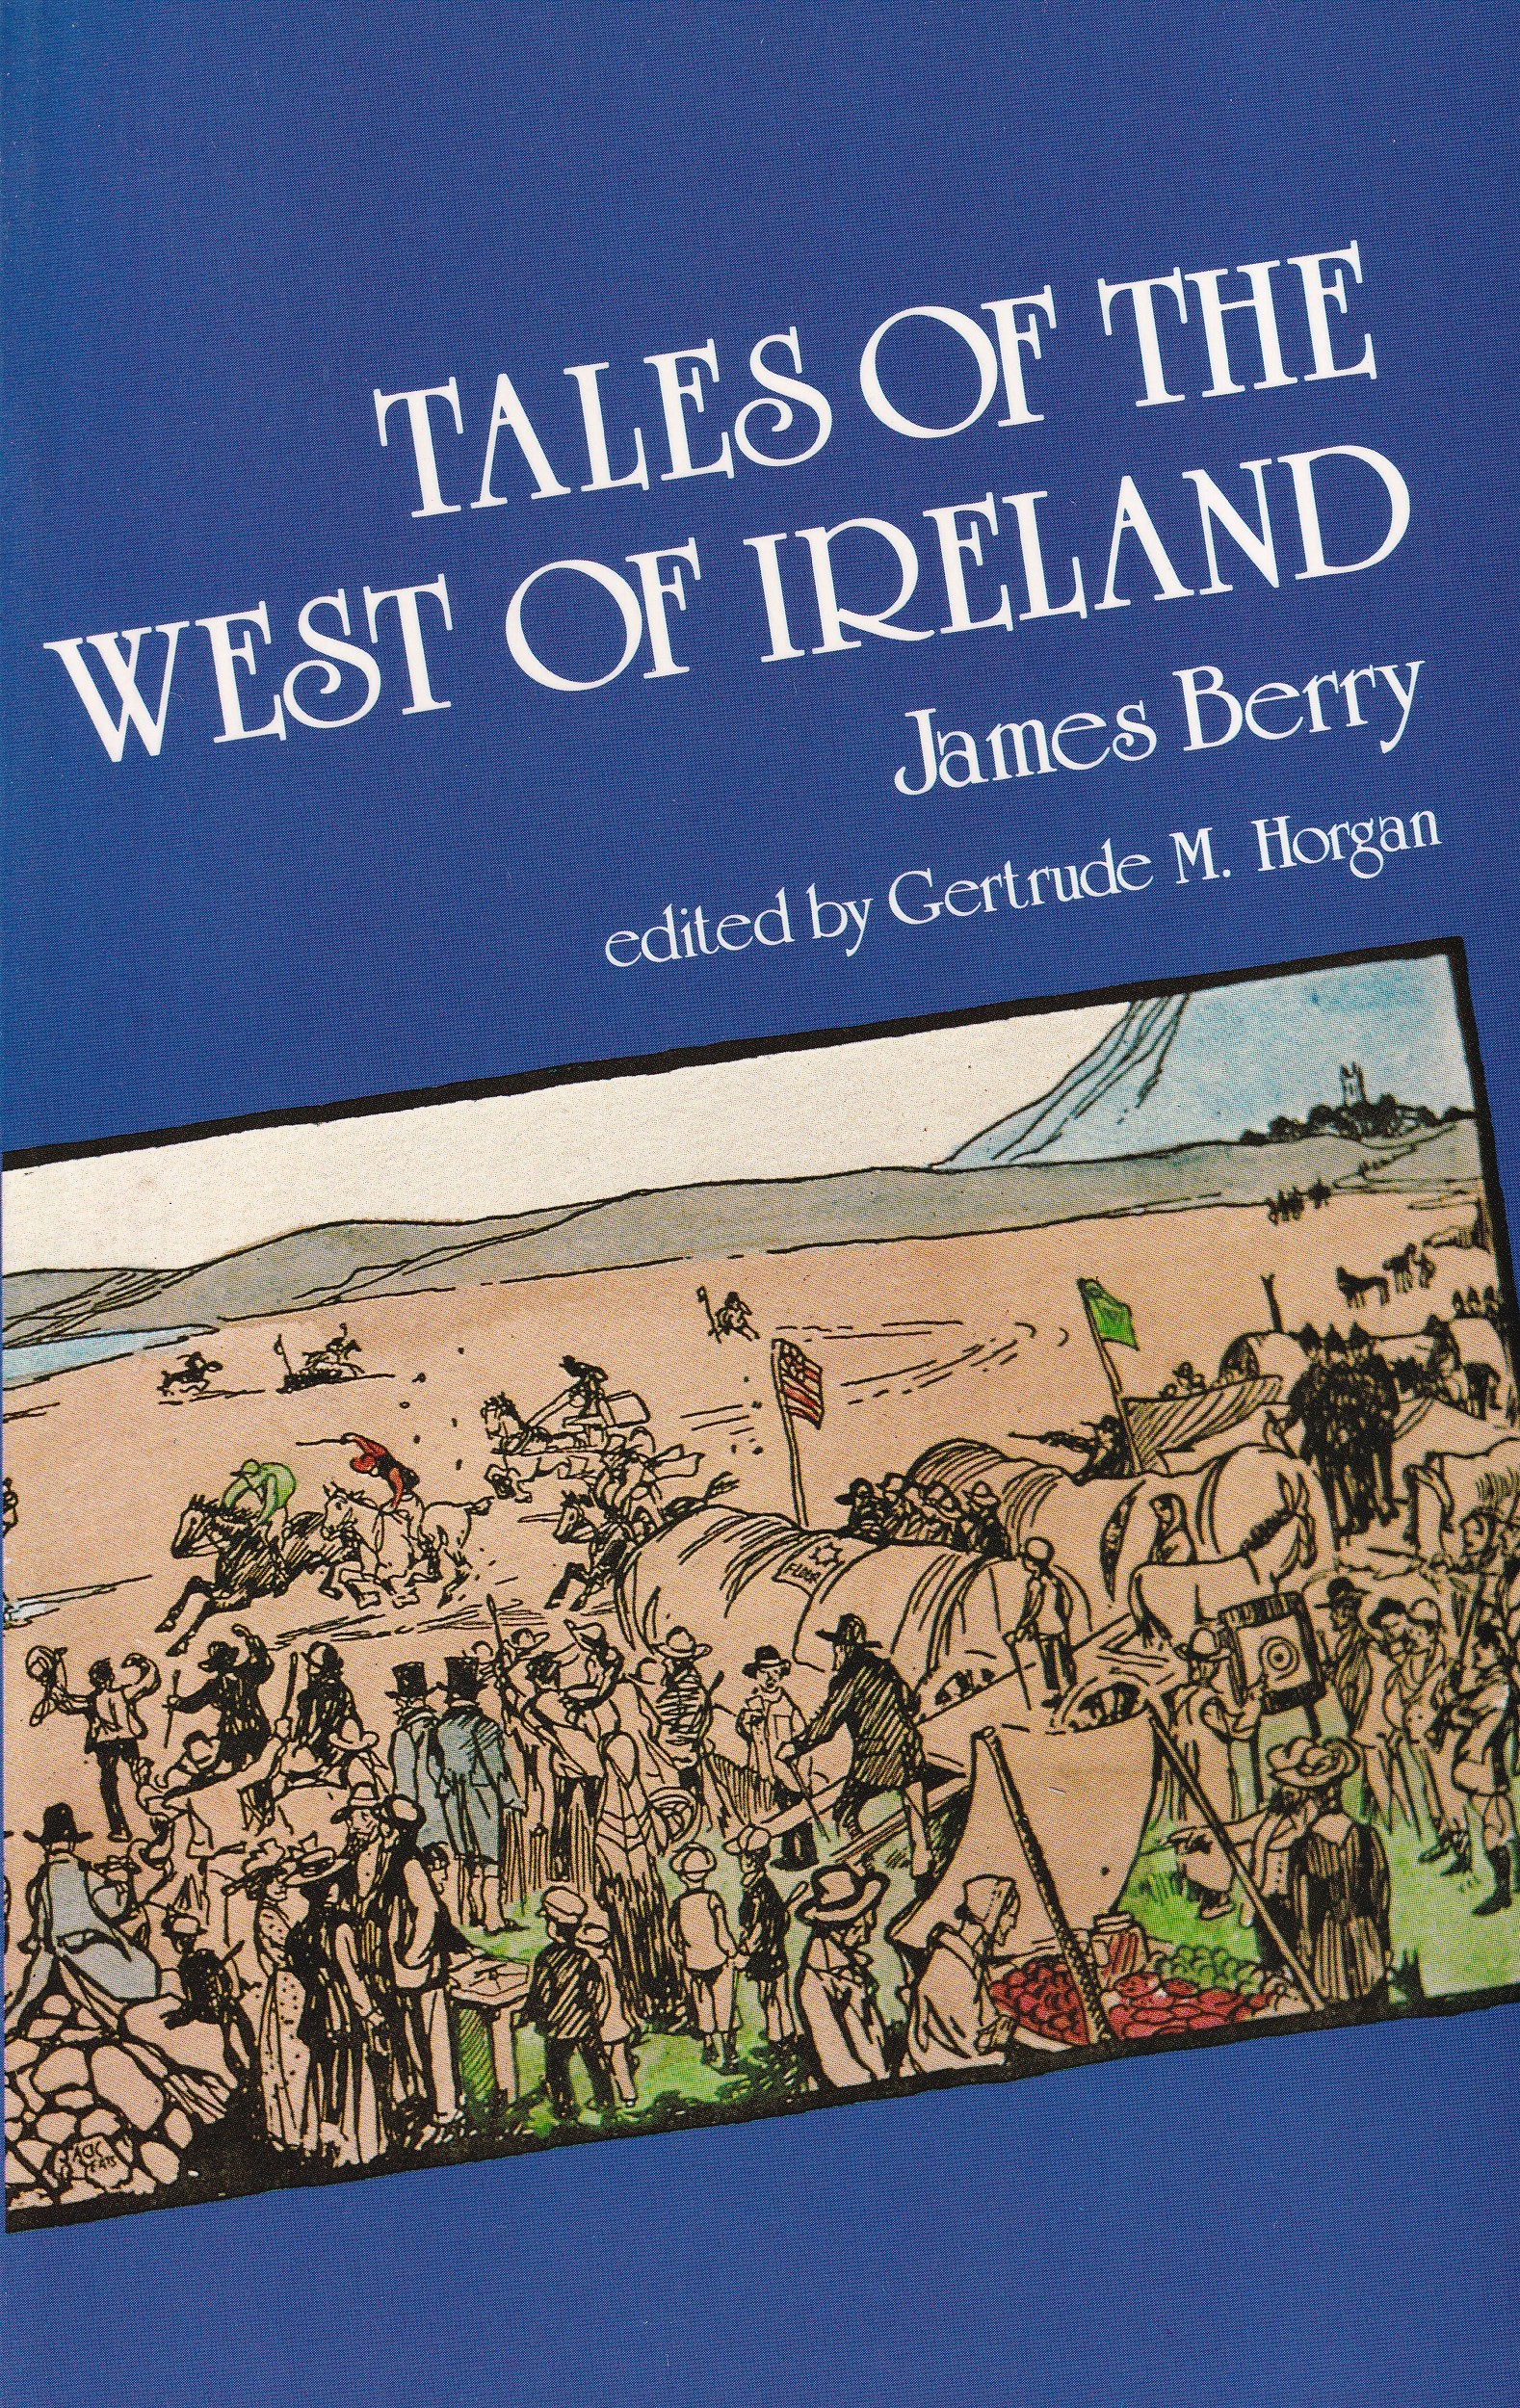 Tales of The West of Ireland by James Berry